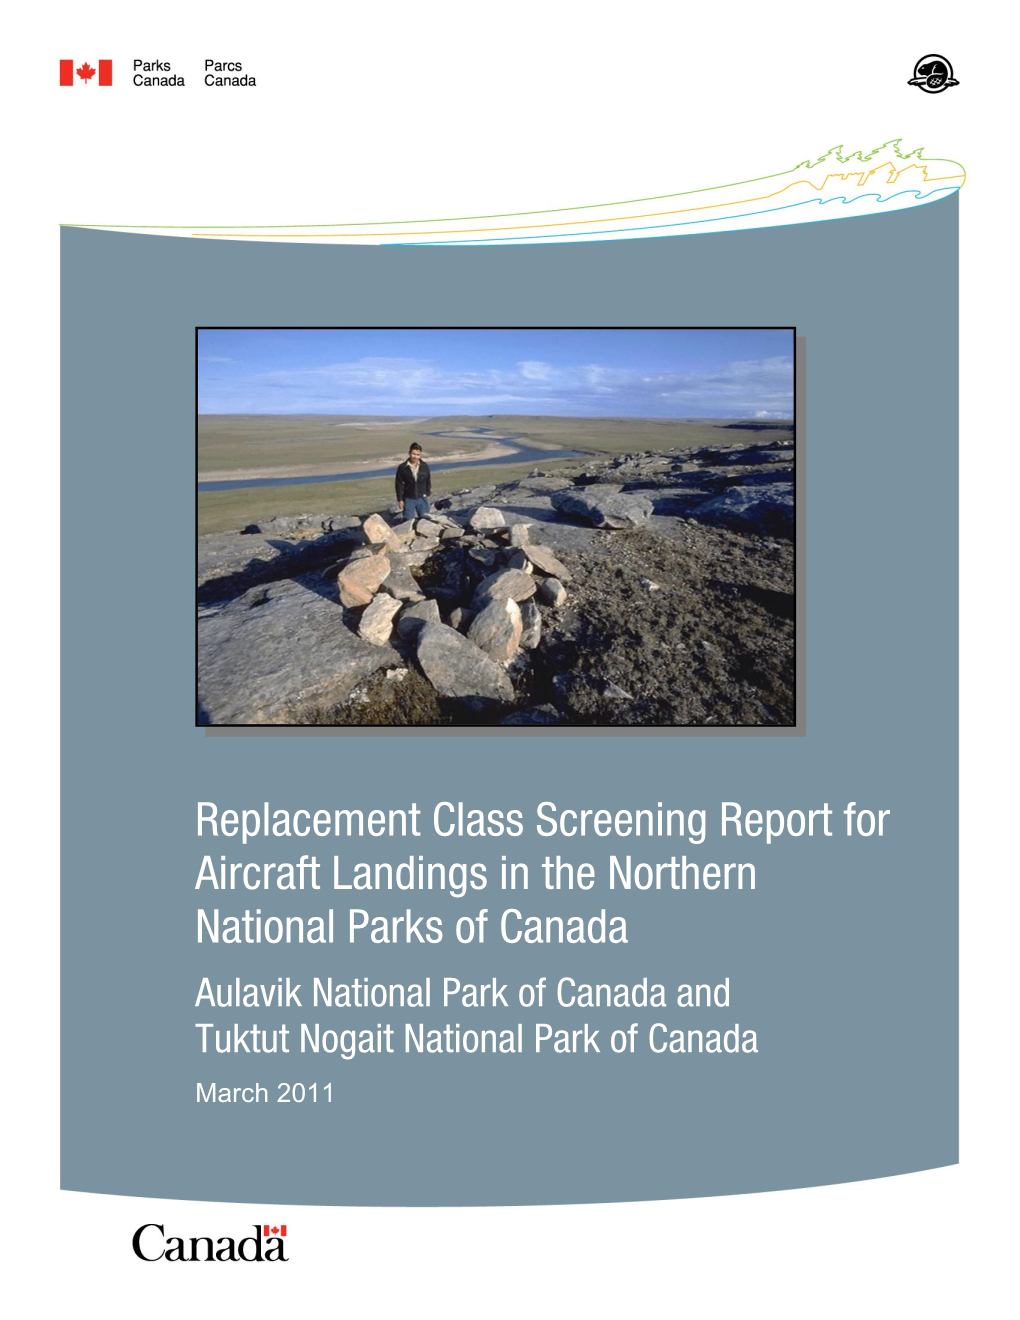 Replacement Class Screening Report for Aircraft Landings in the Northern